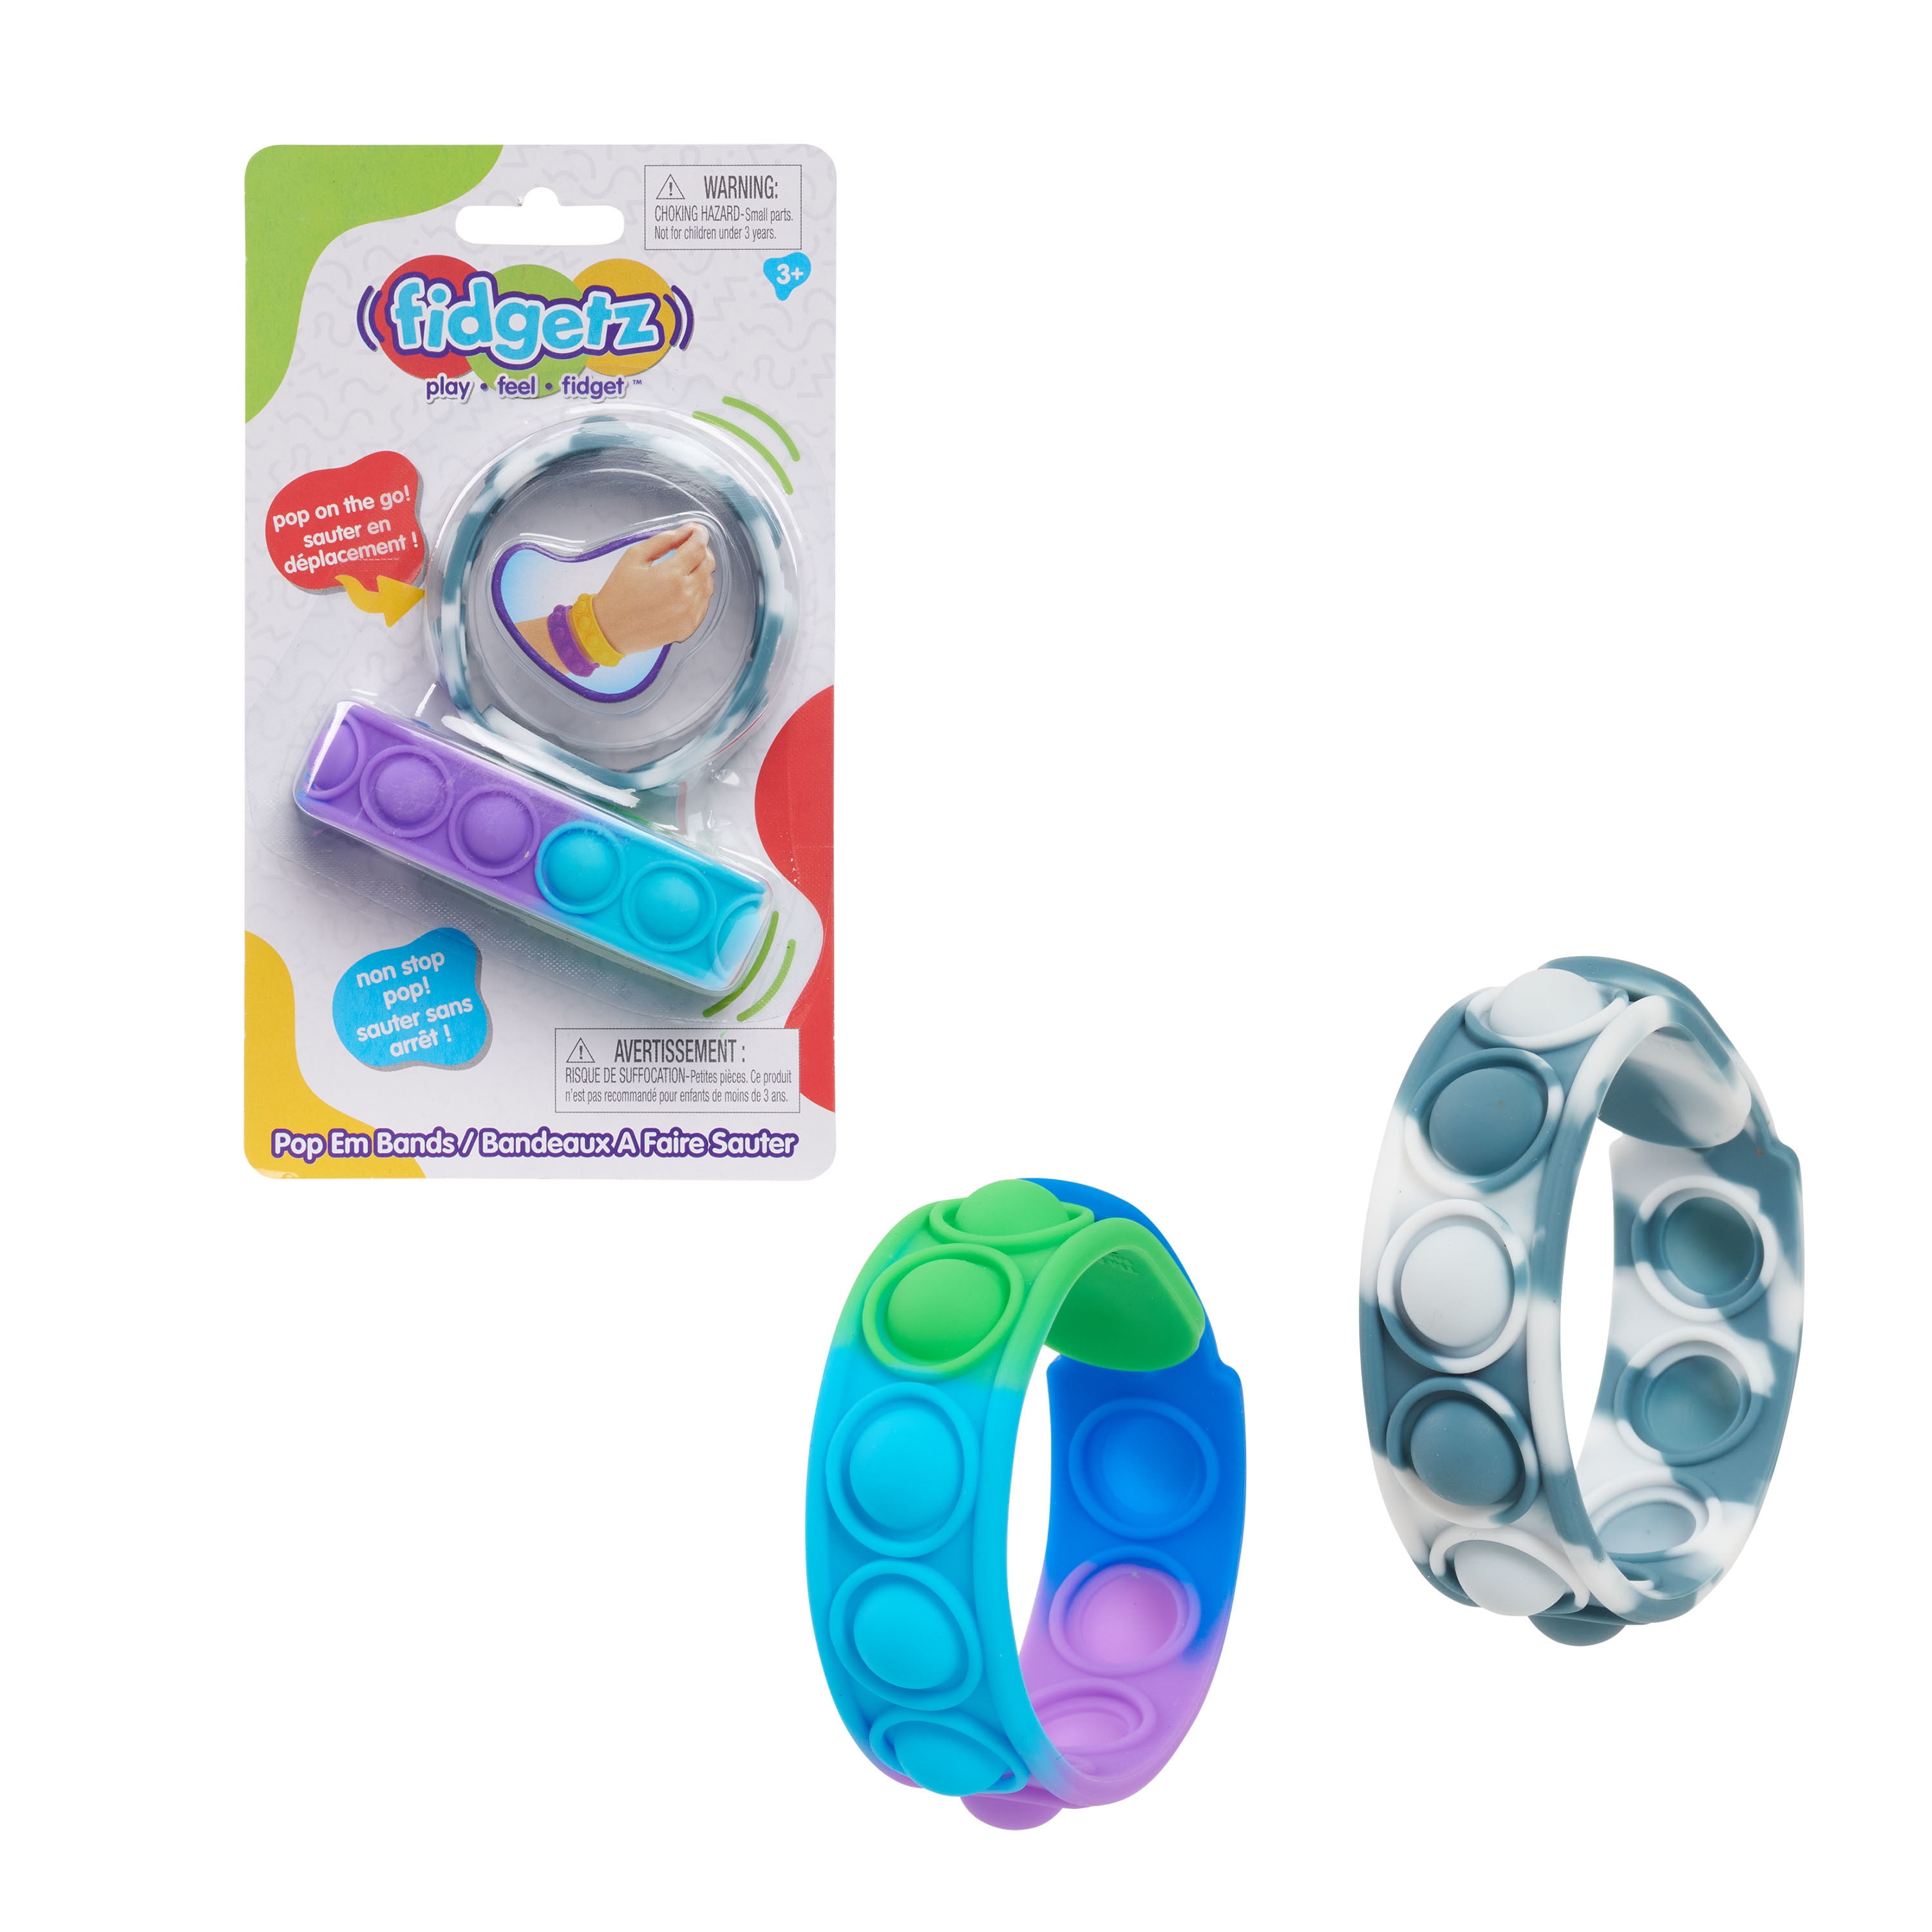 Fidgetz Pop Em's Bands Fidget Toys, Button Sensory Toys for Kids and Adults, Anxiety and Stress Relief Toys, Assortment, Styles May Vary,  Kids Toys for Ages 3 Up, Gifts and Presents